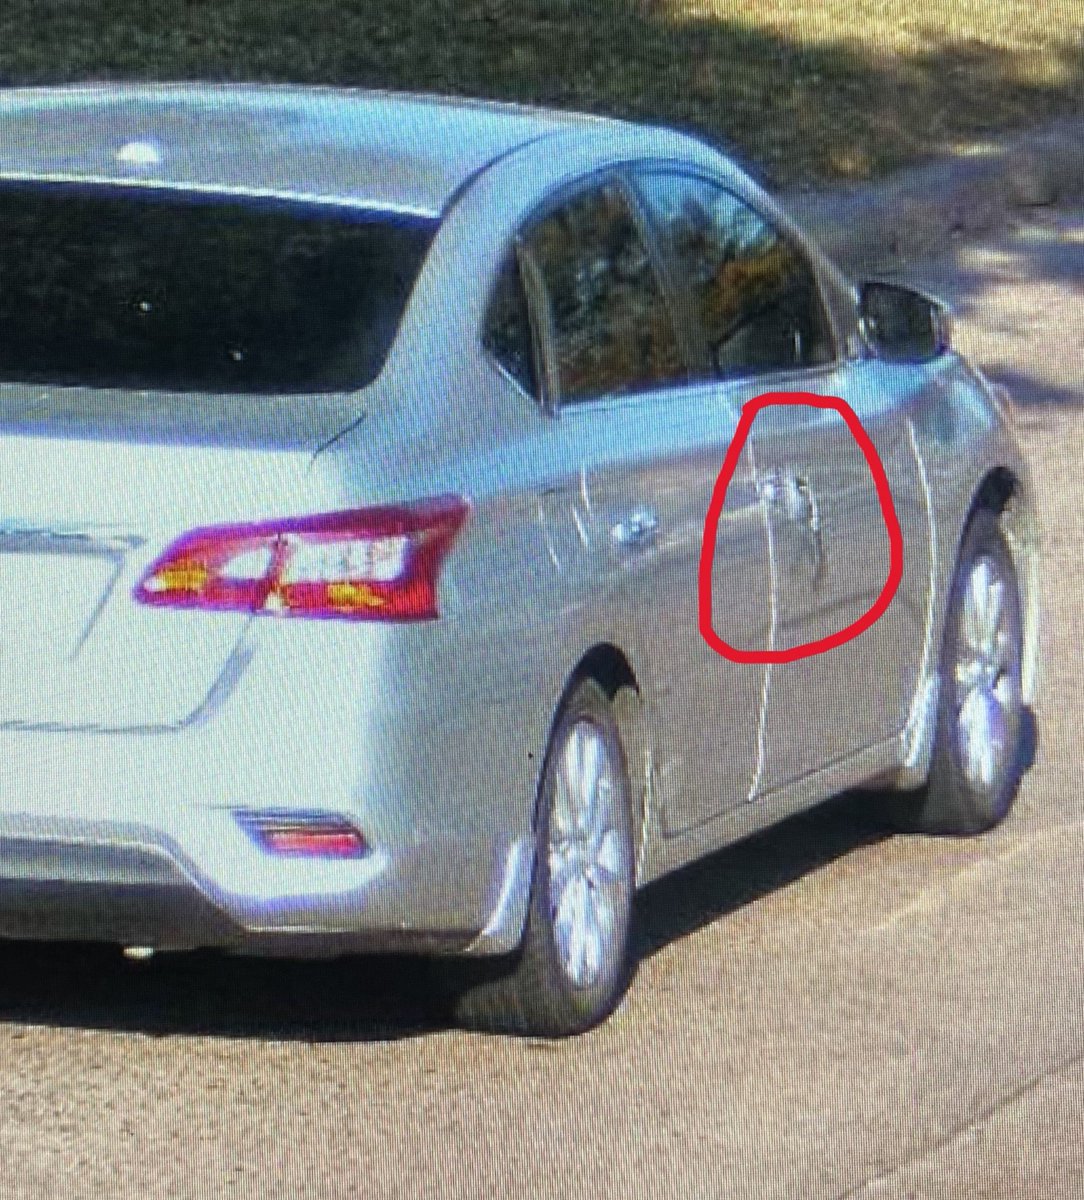 Homicide detectives are looking for this vehicle, likely a gray Nissan Sentra with a broken door handle, involved in the Sept. 23rd fatal shooting of two men at 8900 Bissonnet.